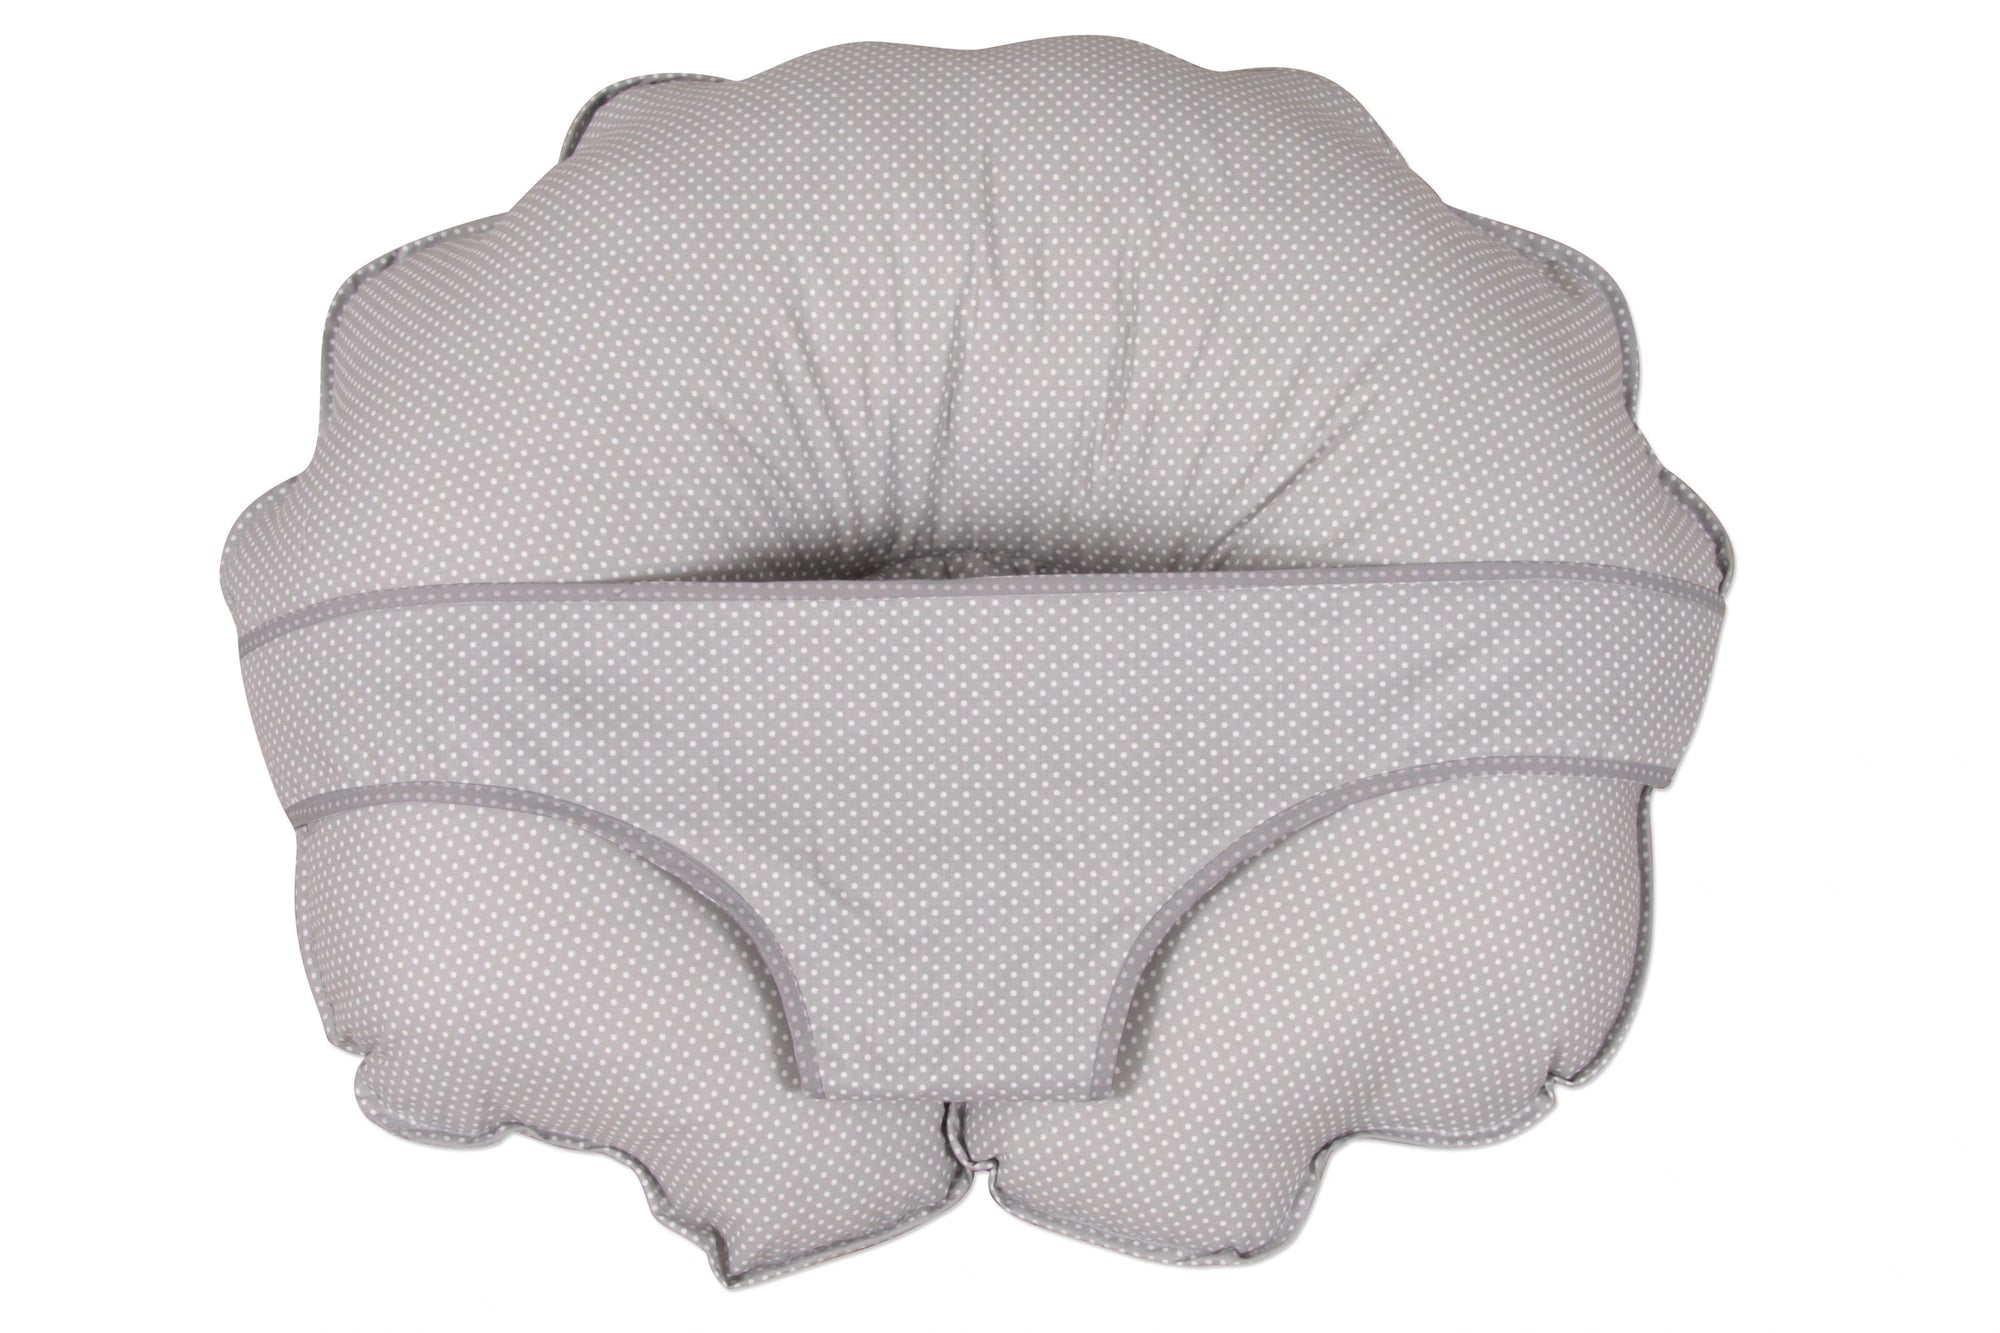 Cuddle-U Product with Seat Wrap in Gray Pin Dot